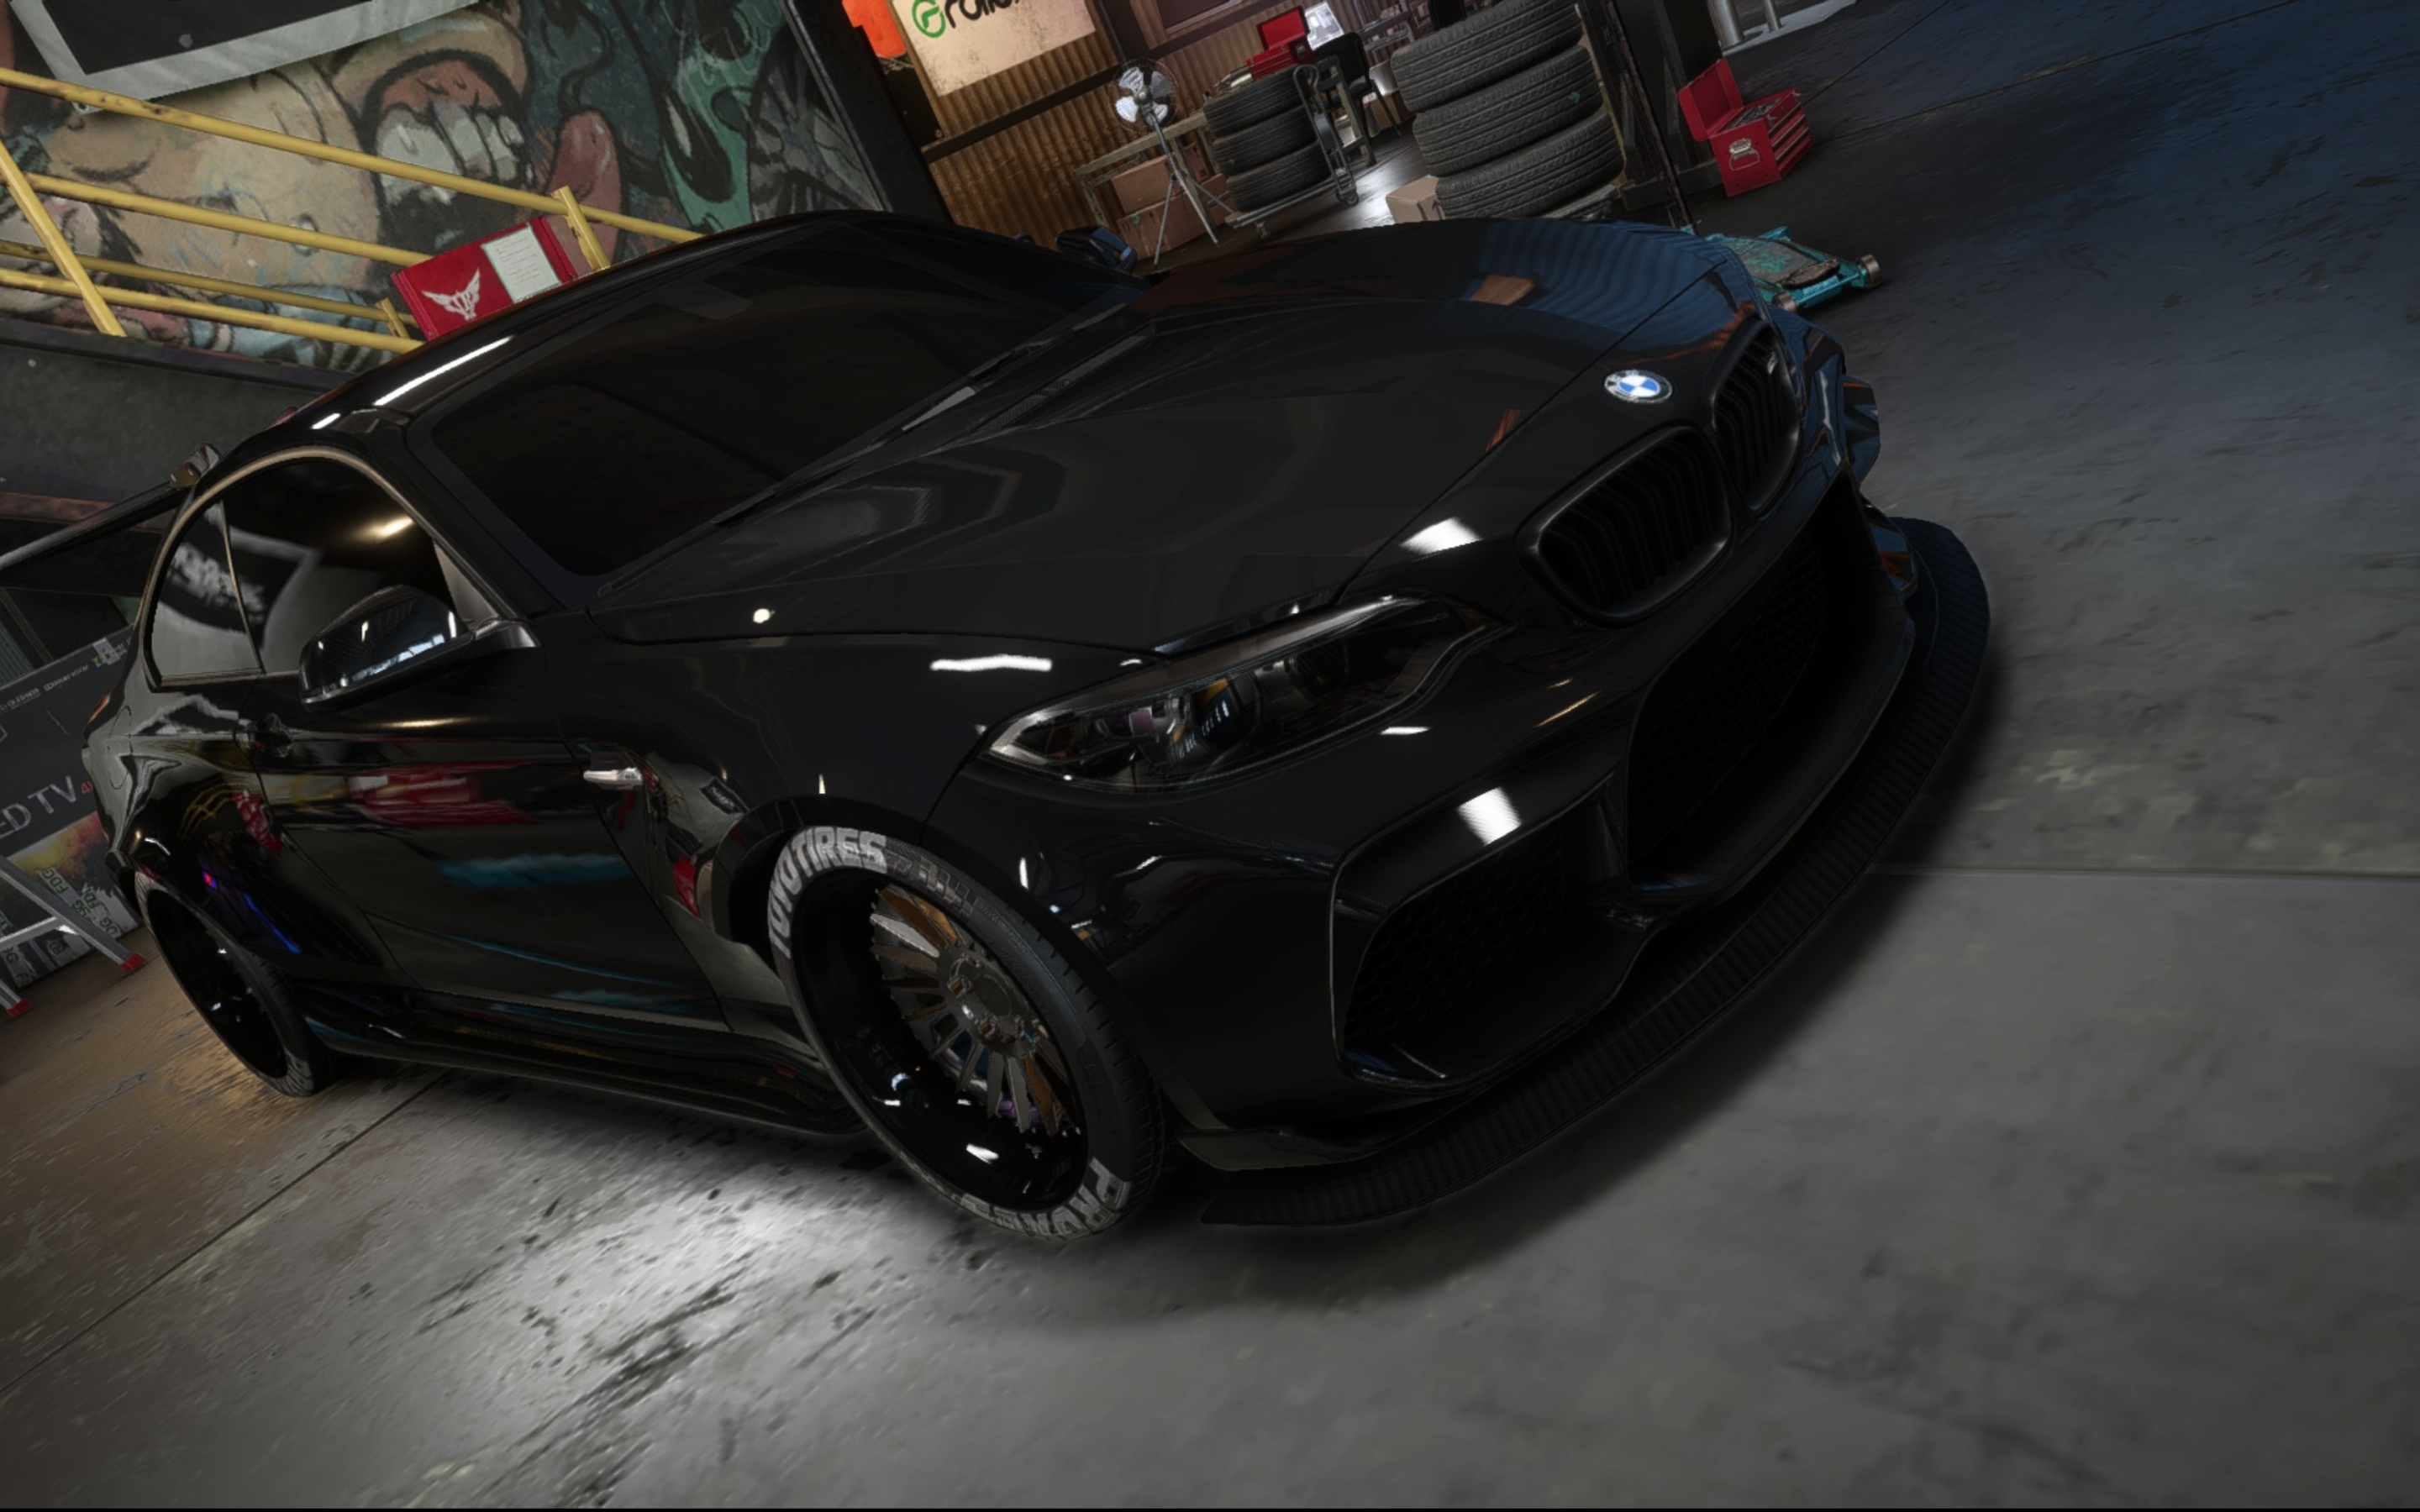 Need for speed payback, dark, bmw m3, car, 2880x1800 wallpaper